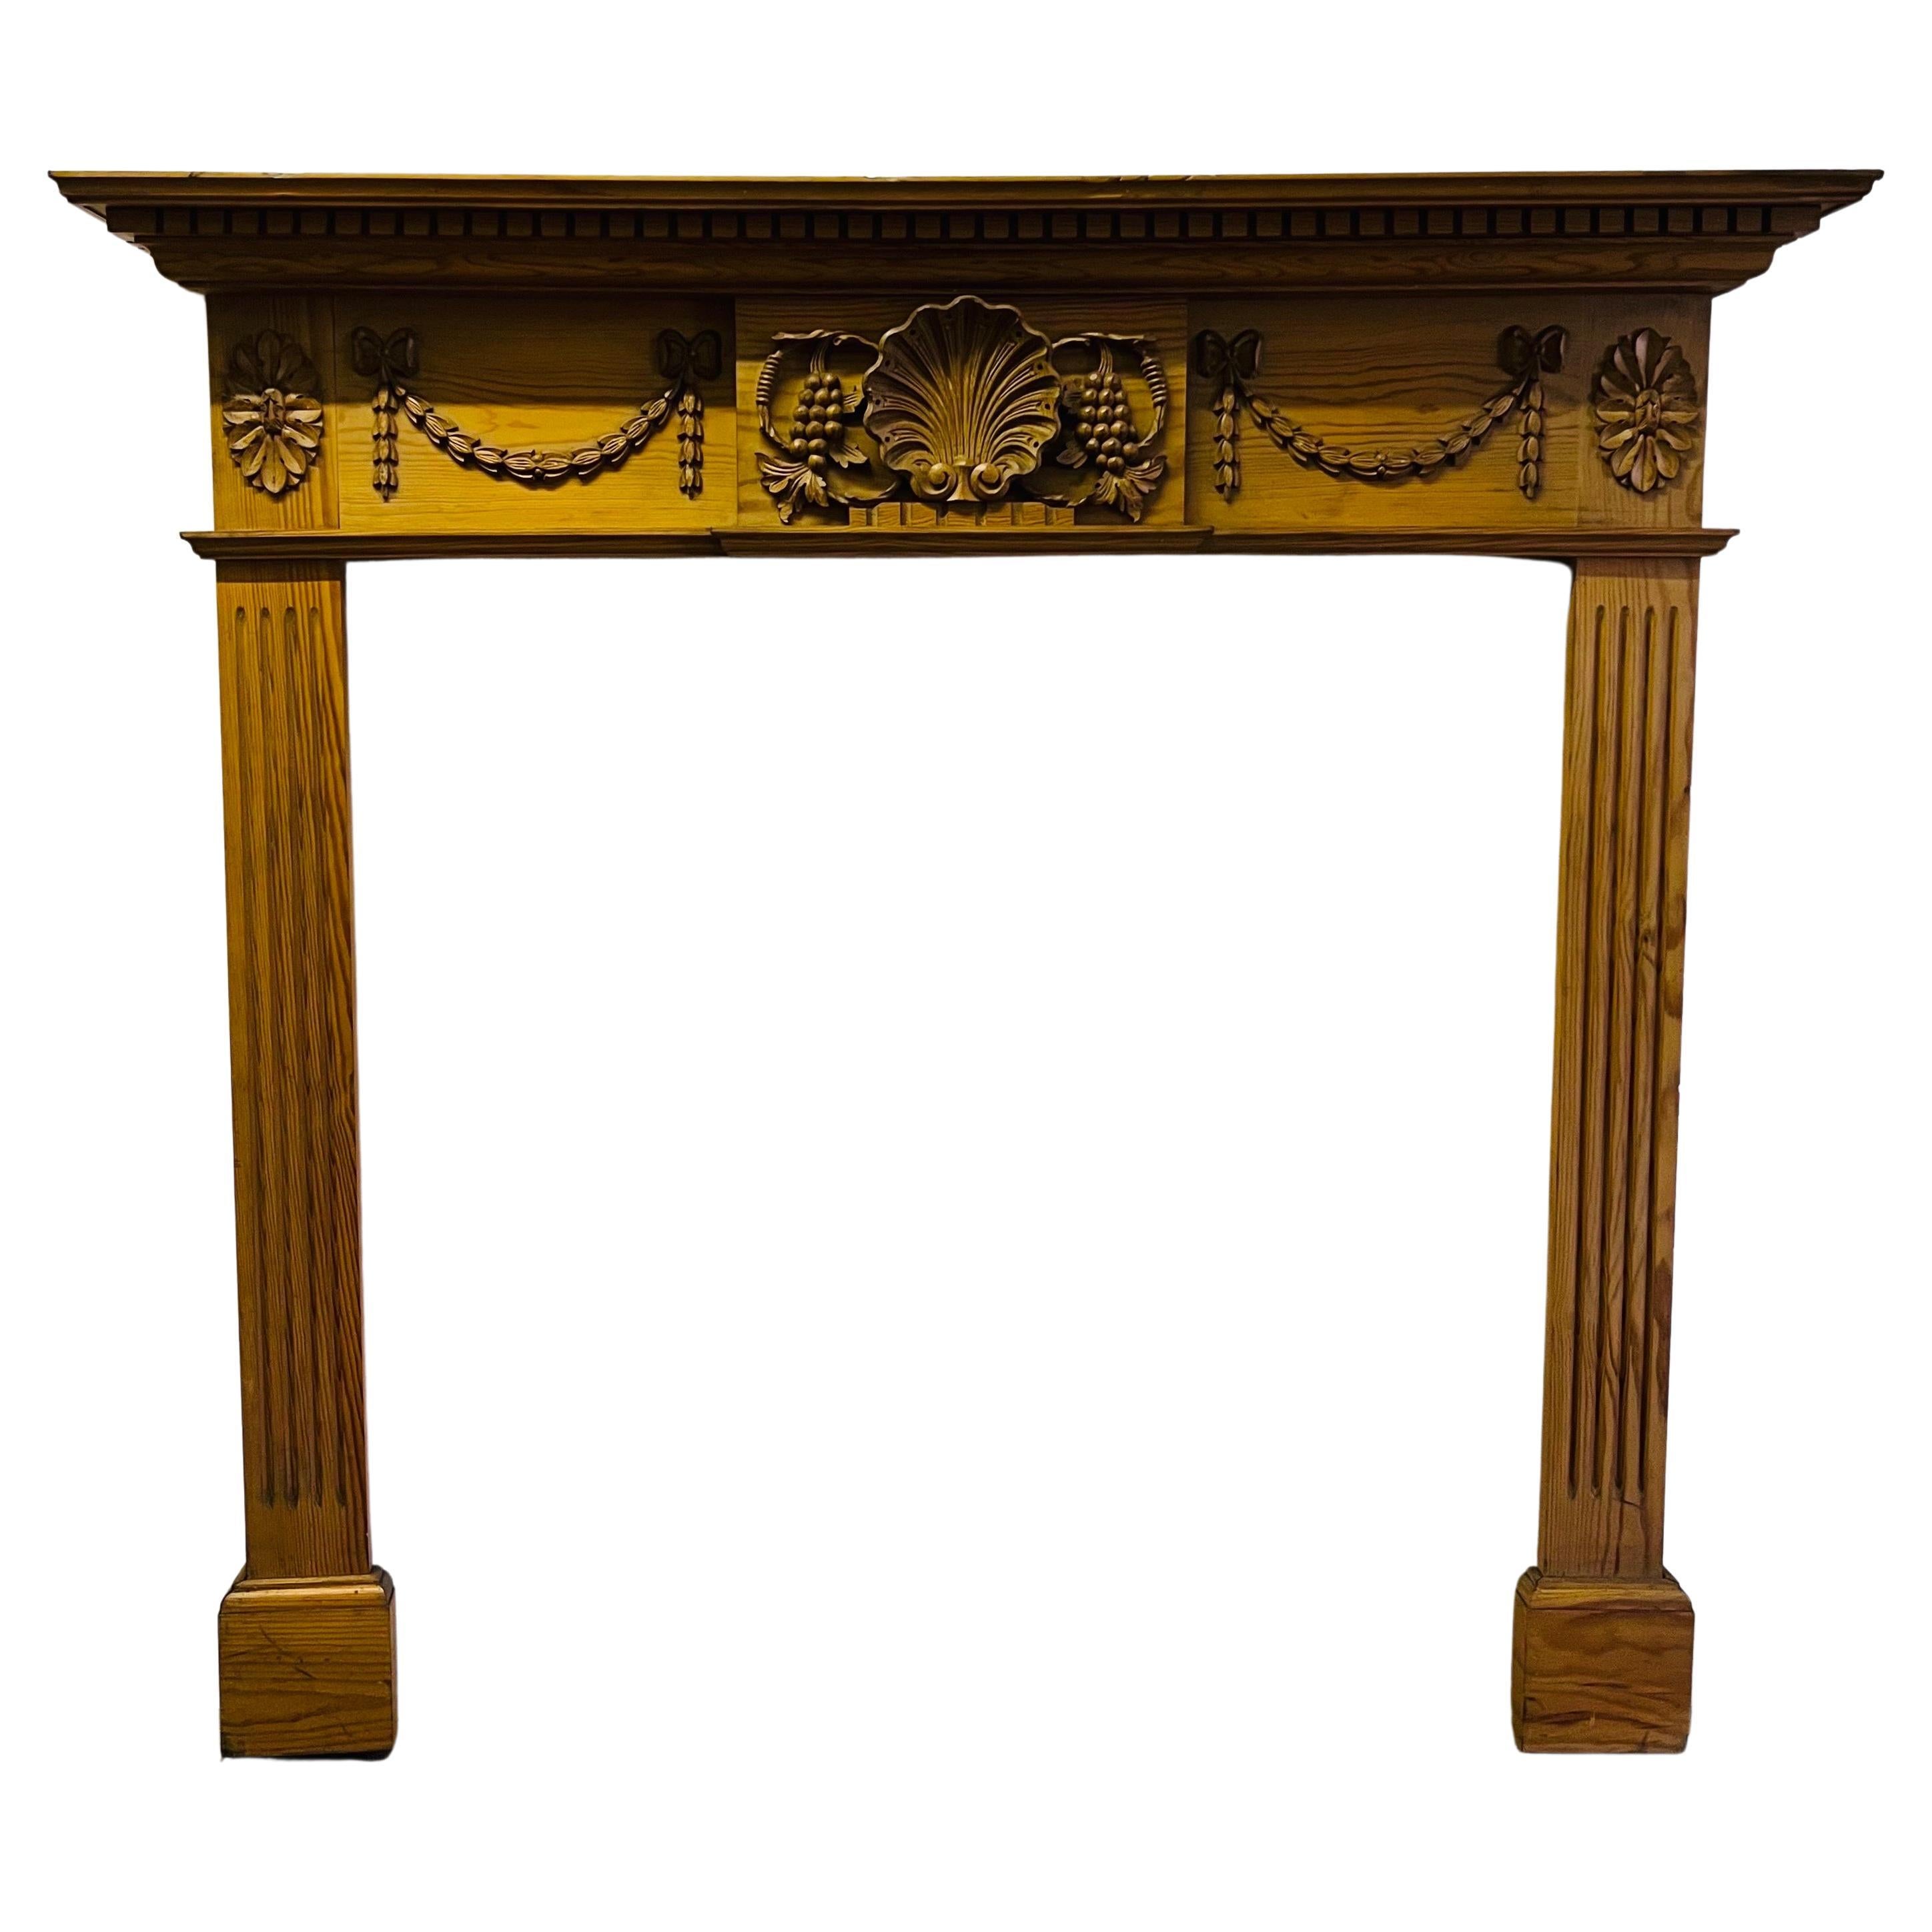 20th Century Georgian Style Hand-Carved Pine Mantelpiece Fireplace Surround For Sale